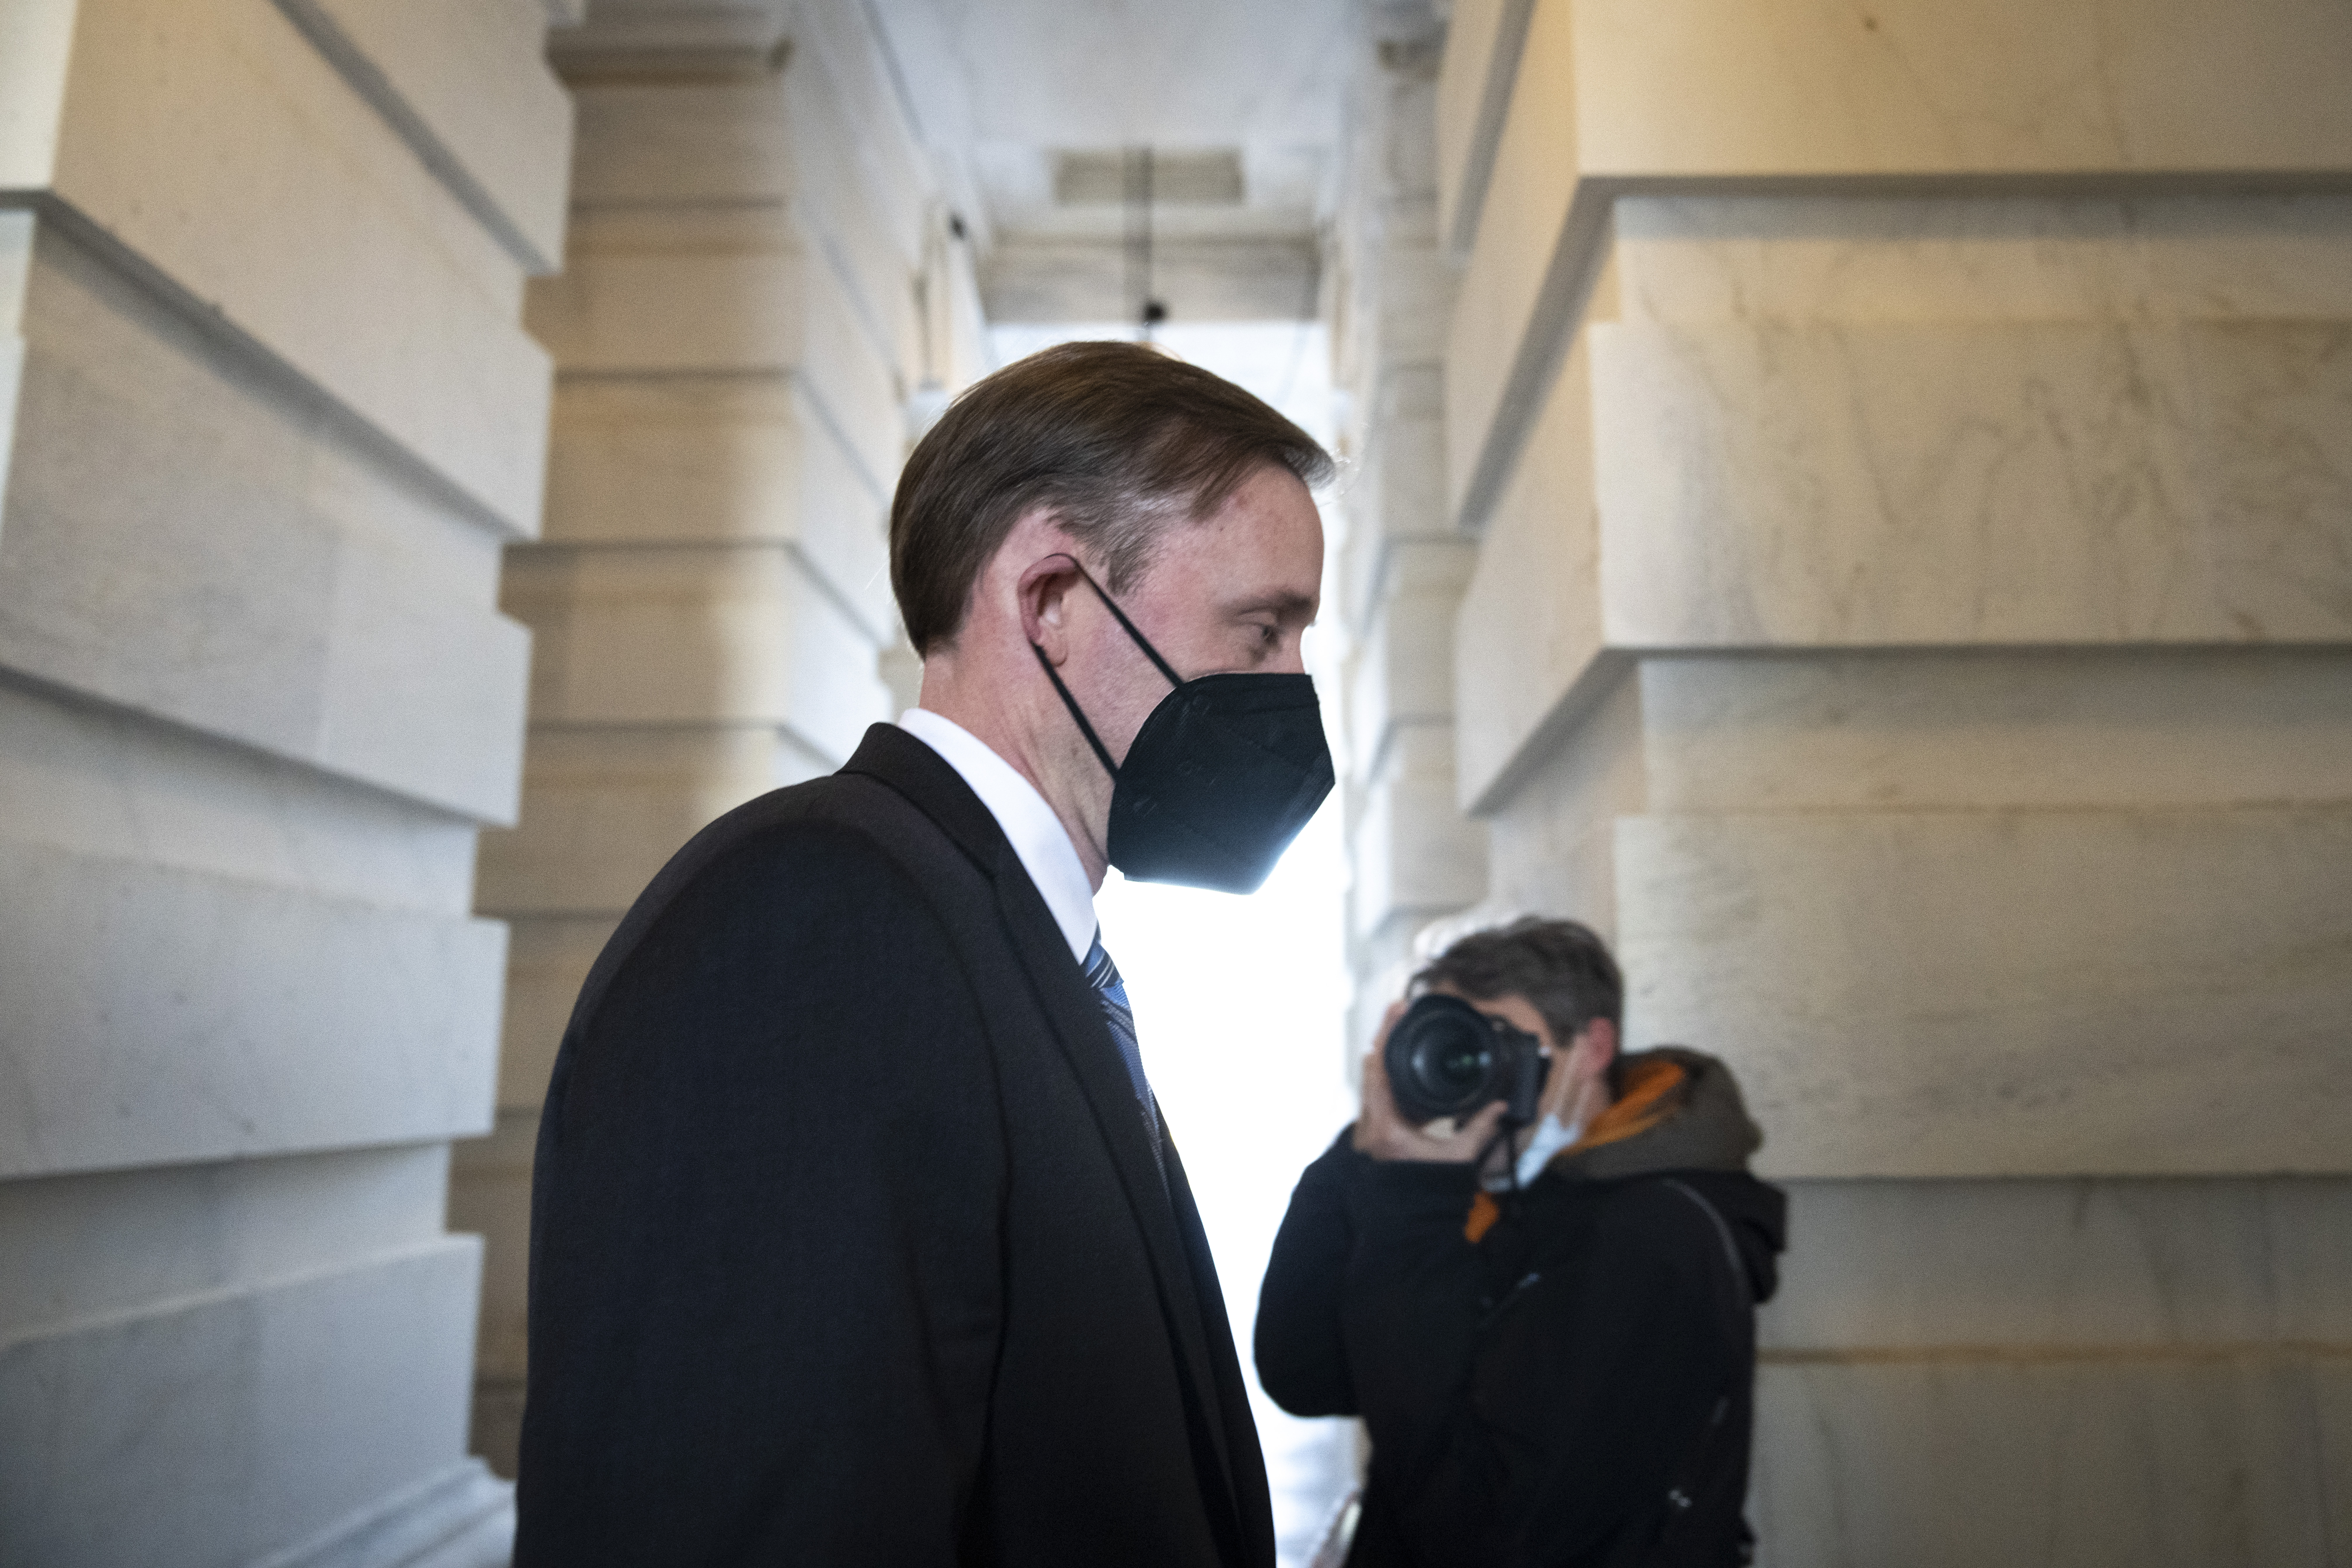 WASHINGTON, DC - FEBRUARY 14: White House National Security Advisor Jake Sullivan leaves the U.S. Capitol after a closed-door briefing with Senators on February 14, 2022 in Washington, DC. Sullivan briefed the lawmakers about Russia's military buildup along its border with Ukraine. (Photo by Drew Angerer/Getty Images)